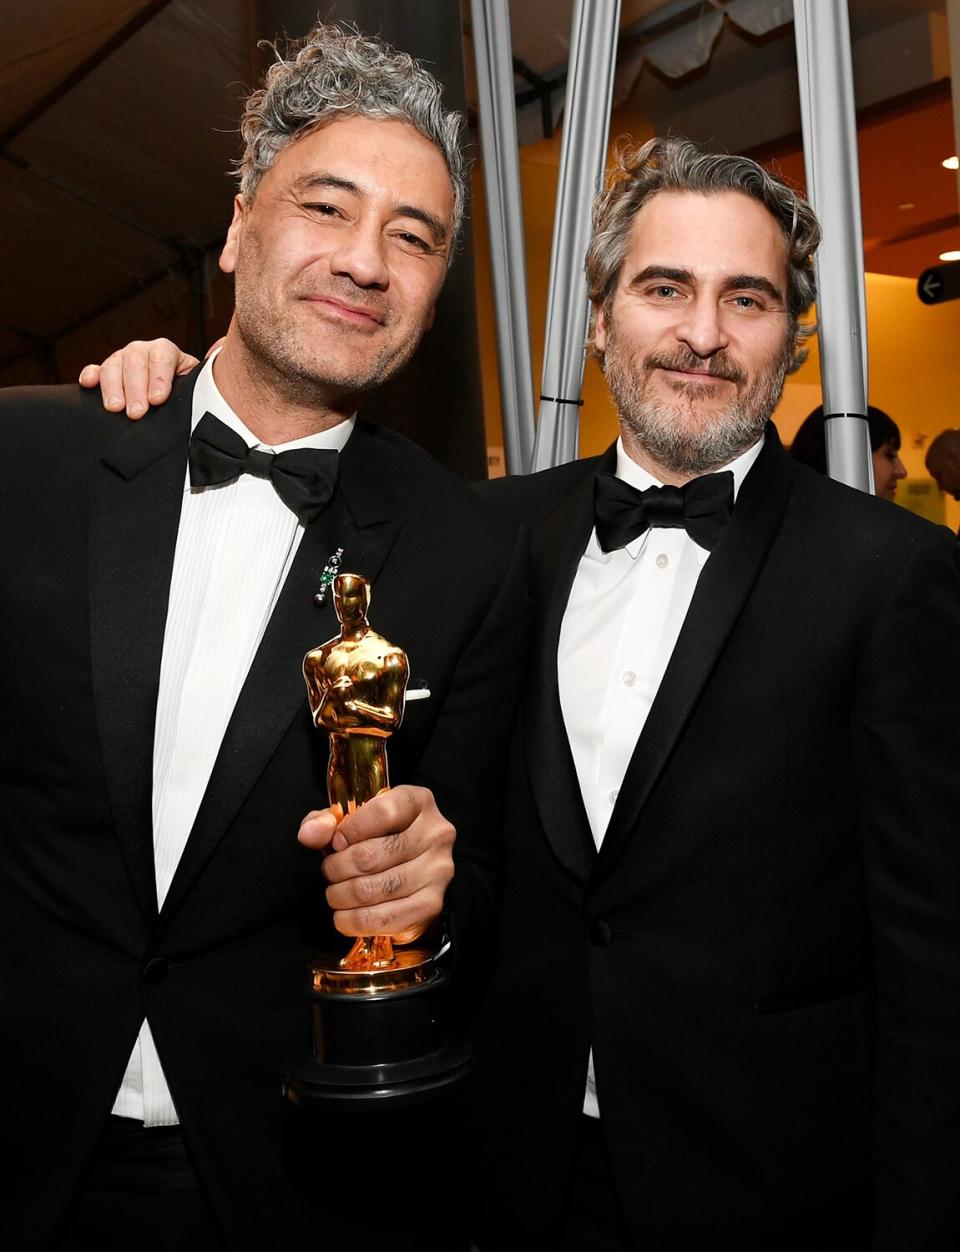 Taika Waititi and Joaquin Phoenix bond over being Academy Award winners at the 92nd Annual Academy Awards Governors Ball.